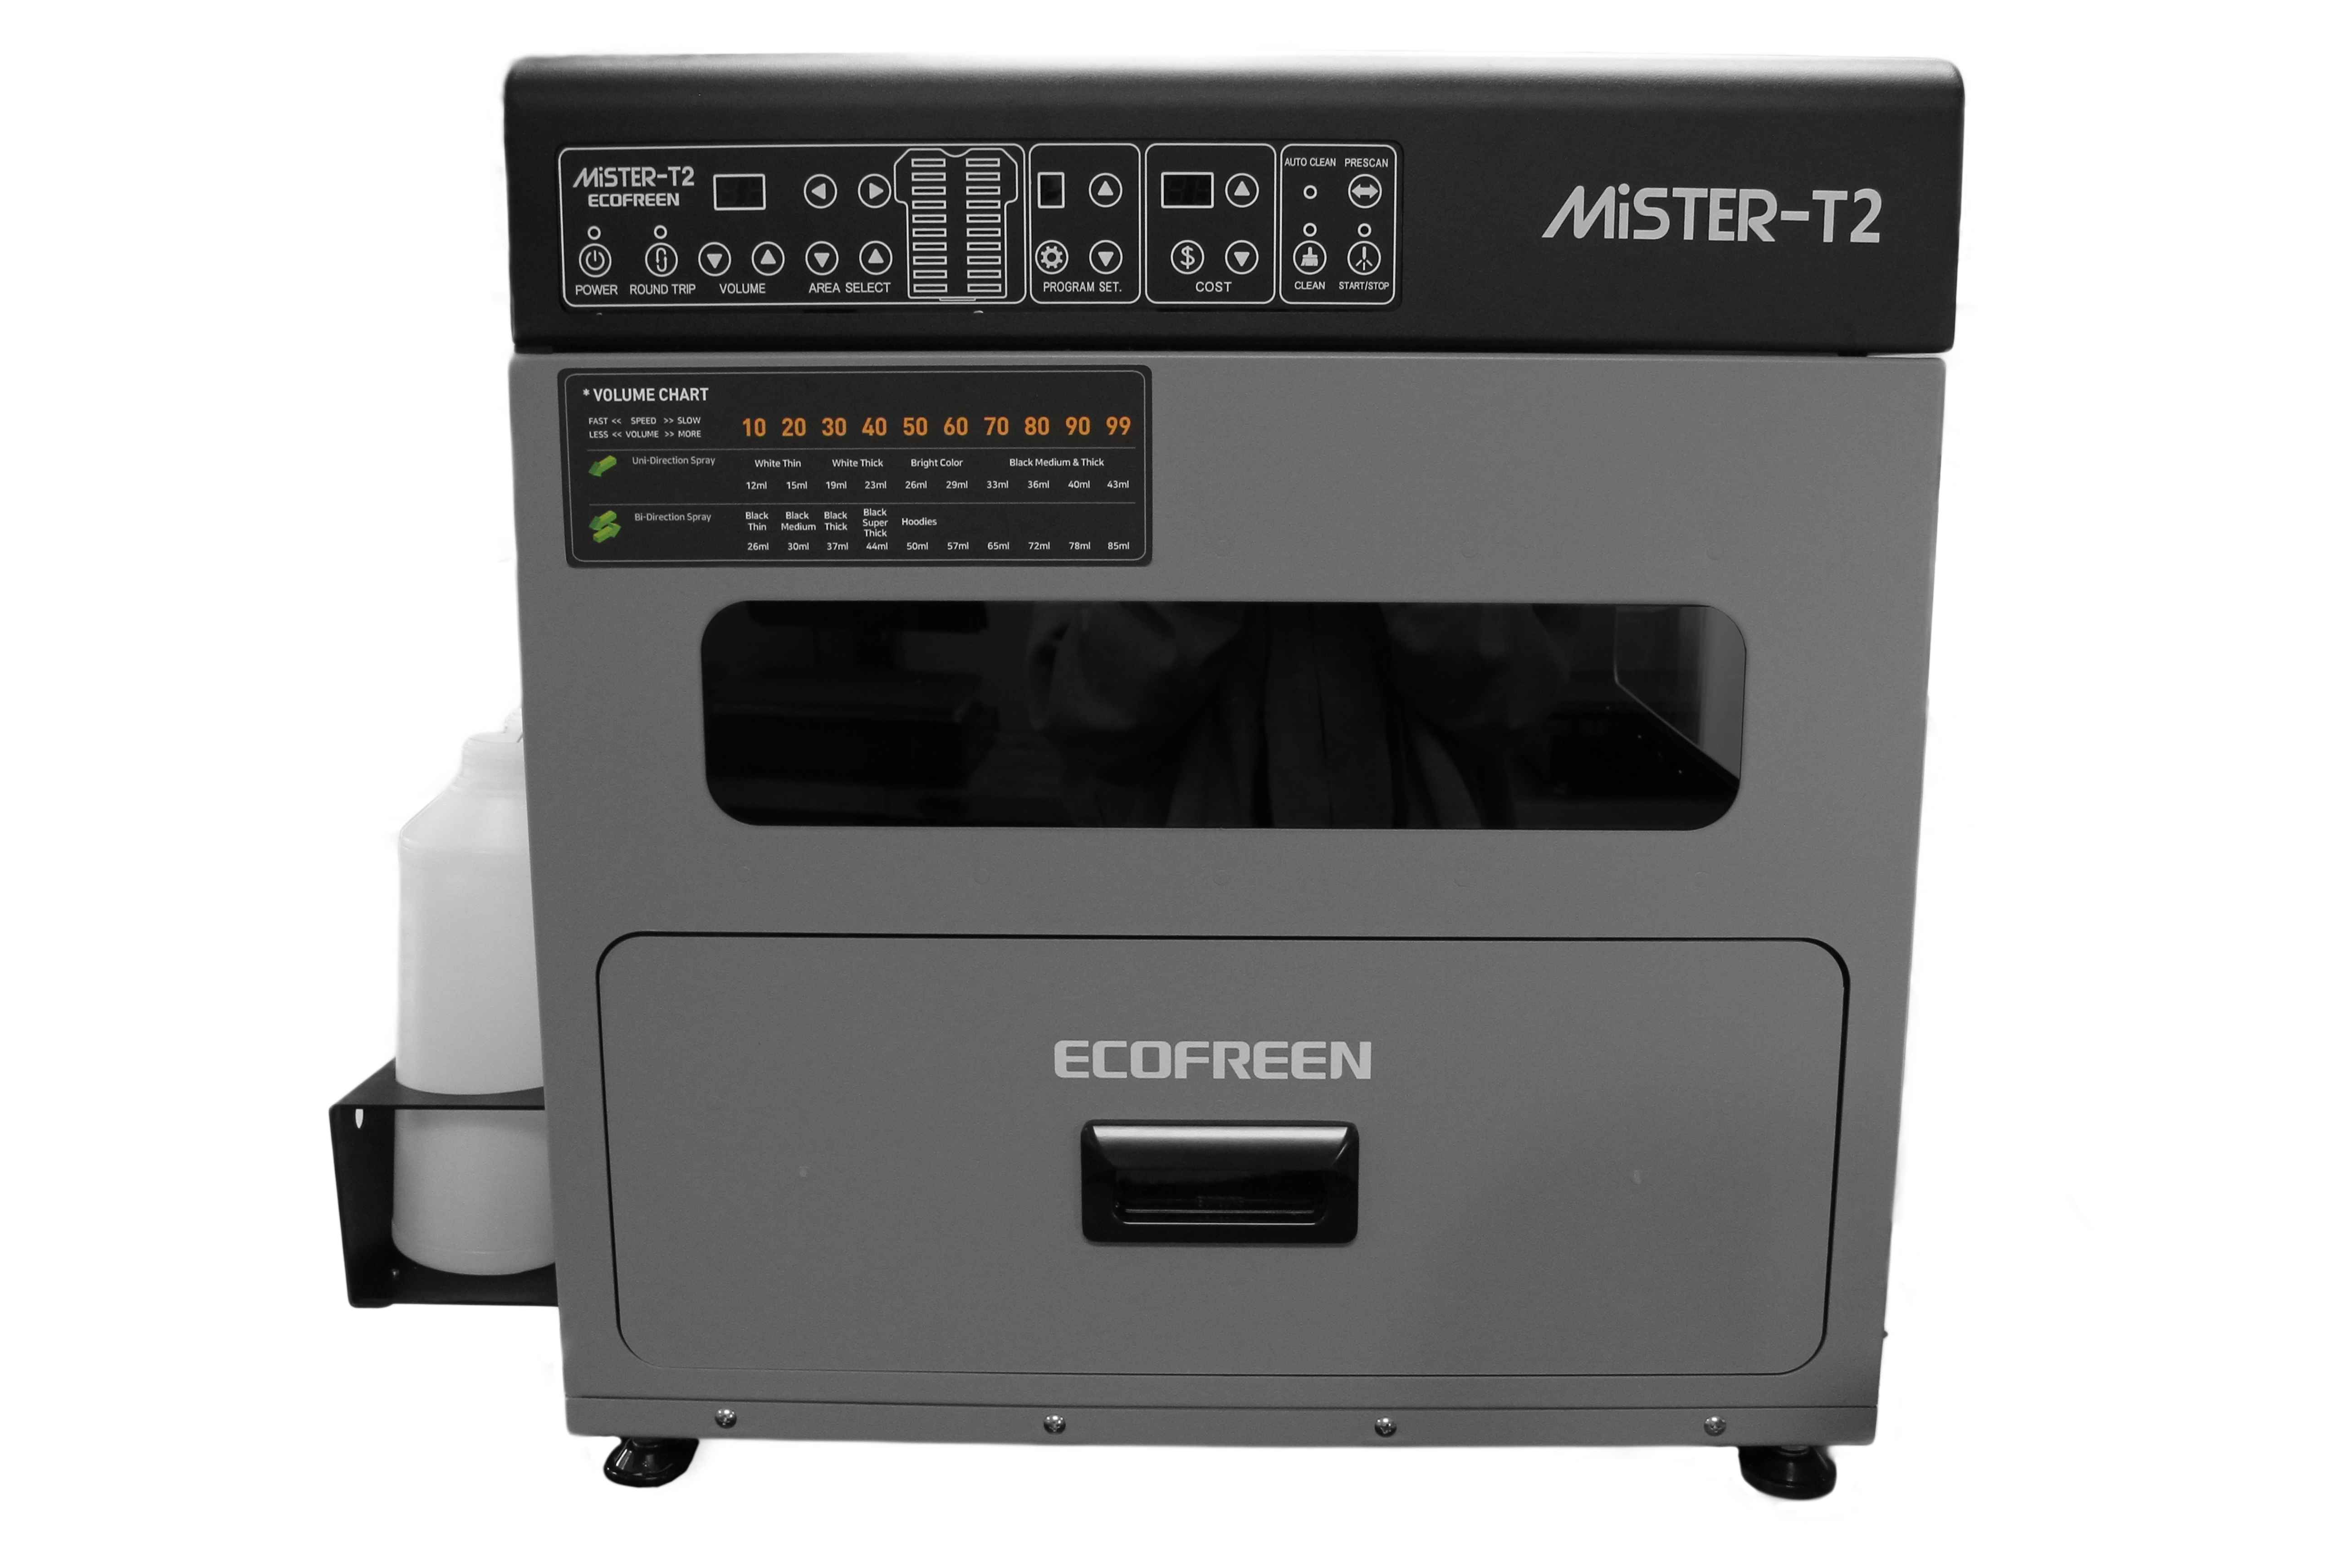 EcoFreen Mister T2 V2 Automatic Pretreat Sprayer - Joto Imaging Supplies US